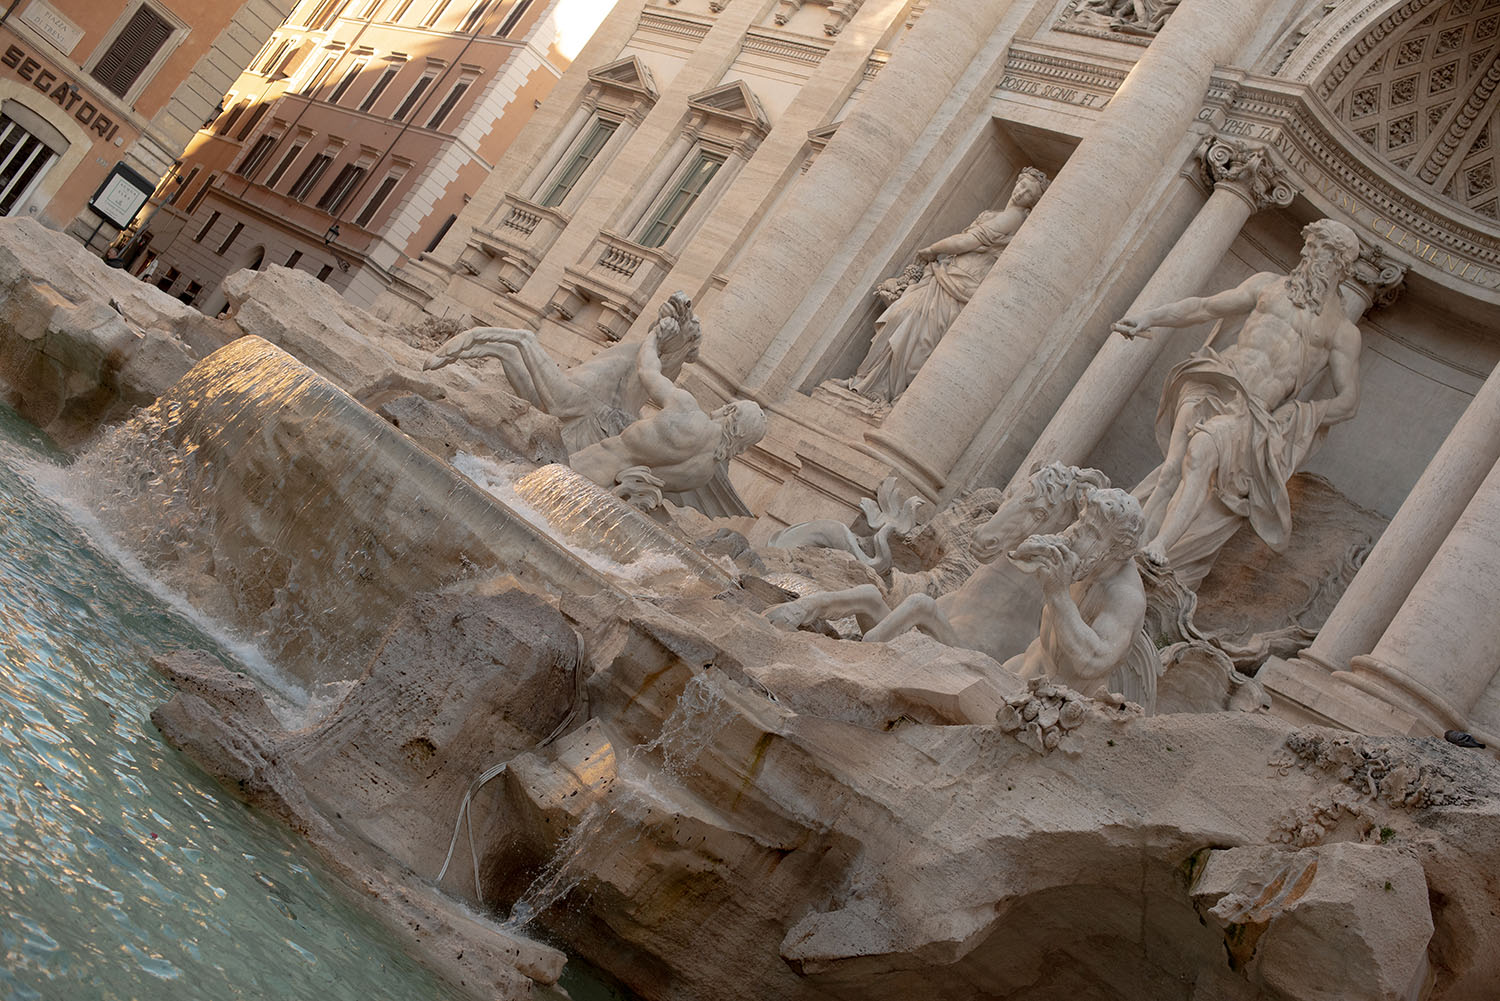 Coco & Vera - Early morning at the Trevi Fountain in Rome